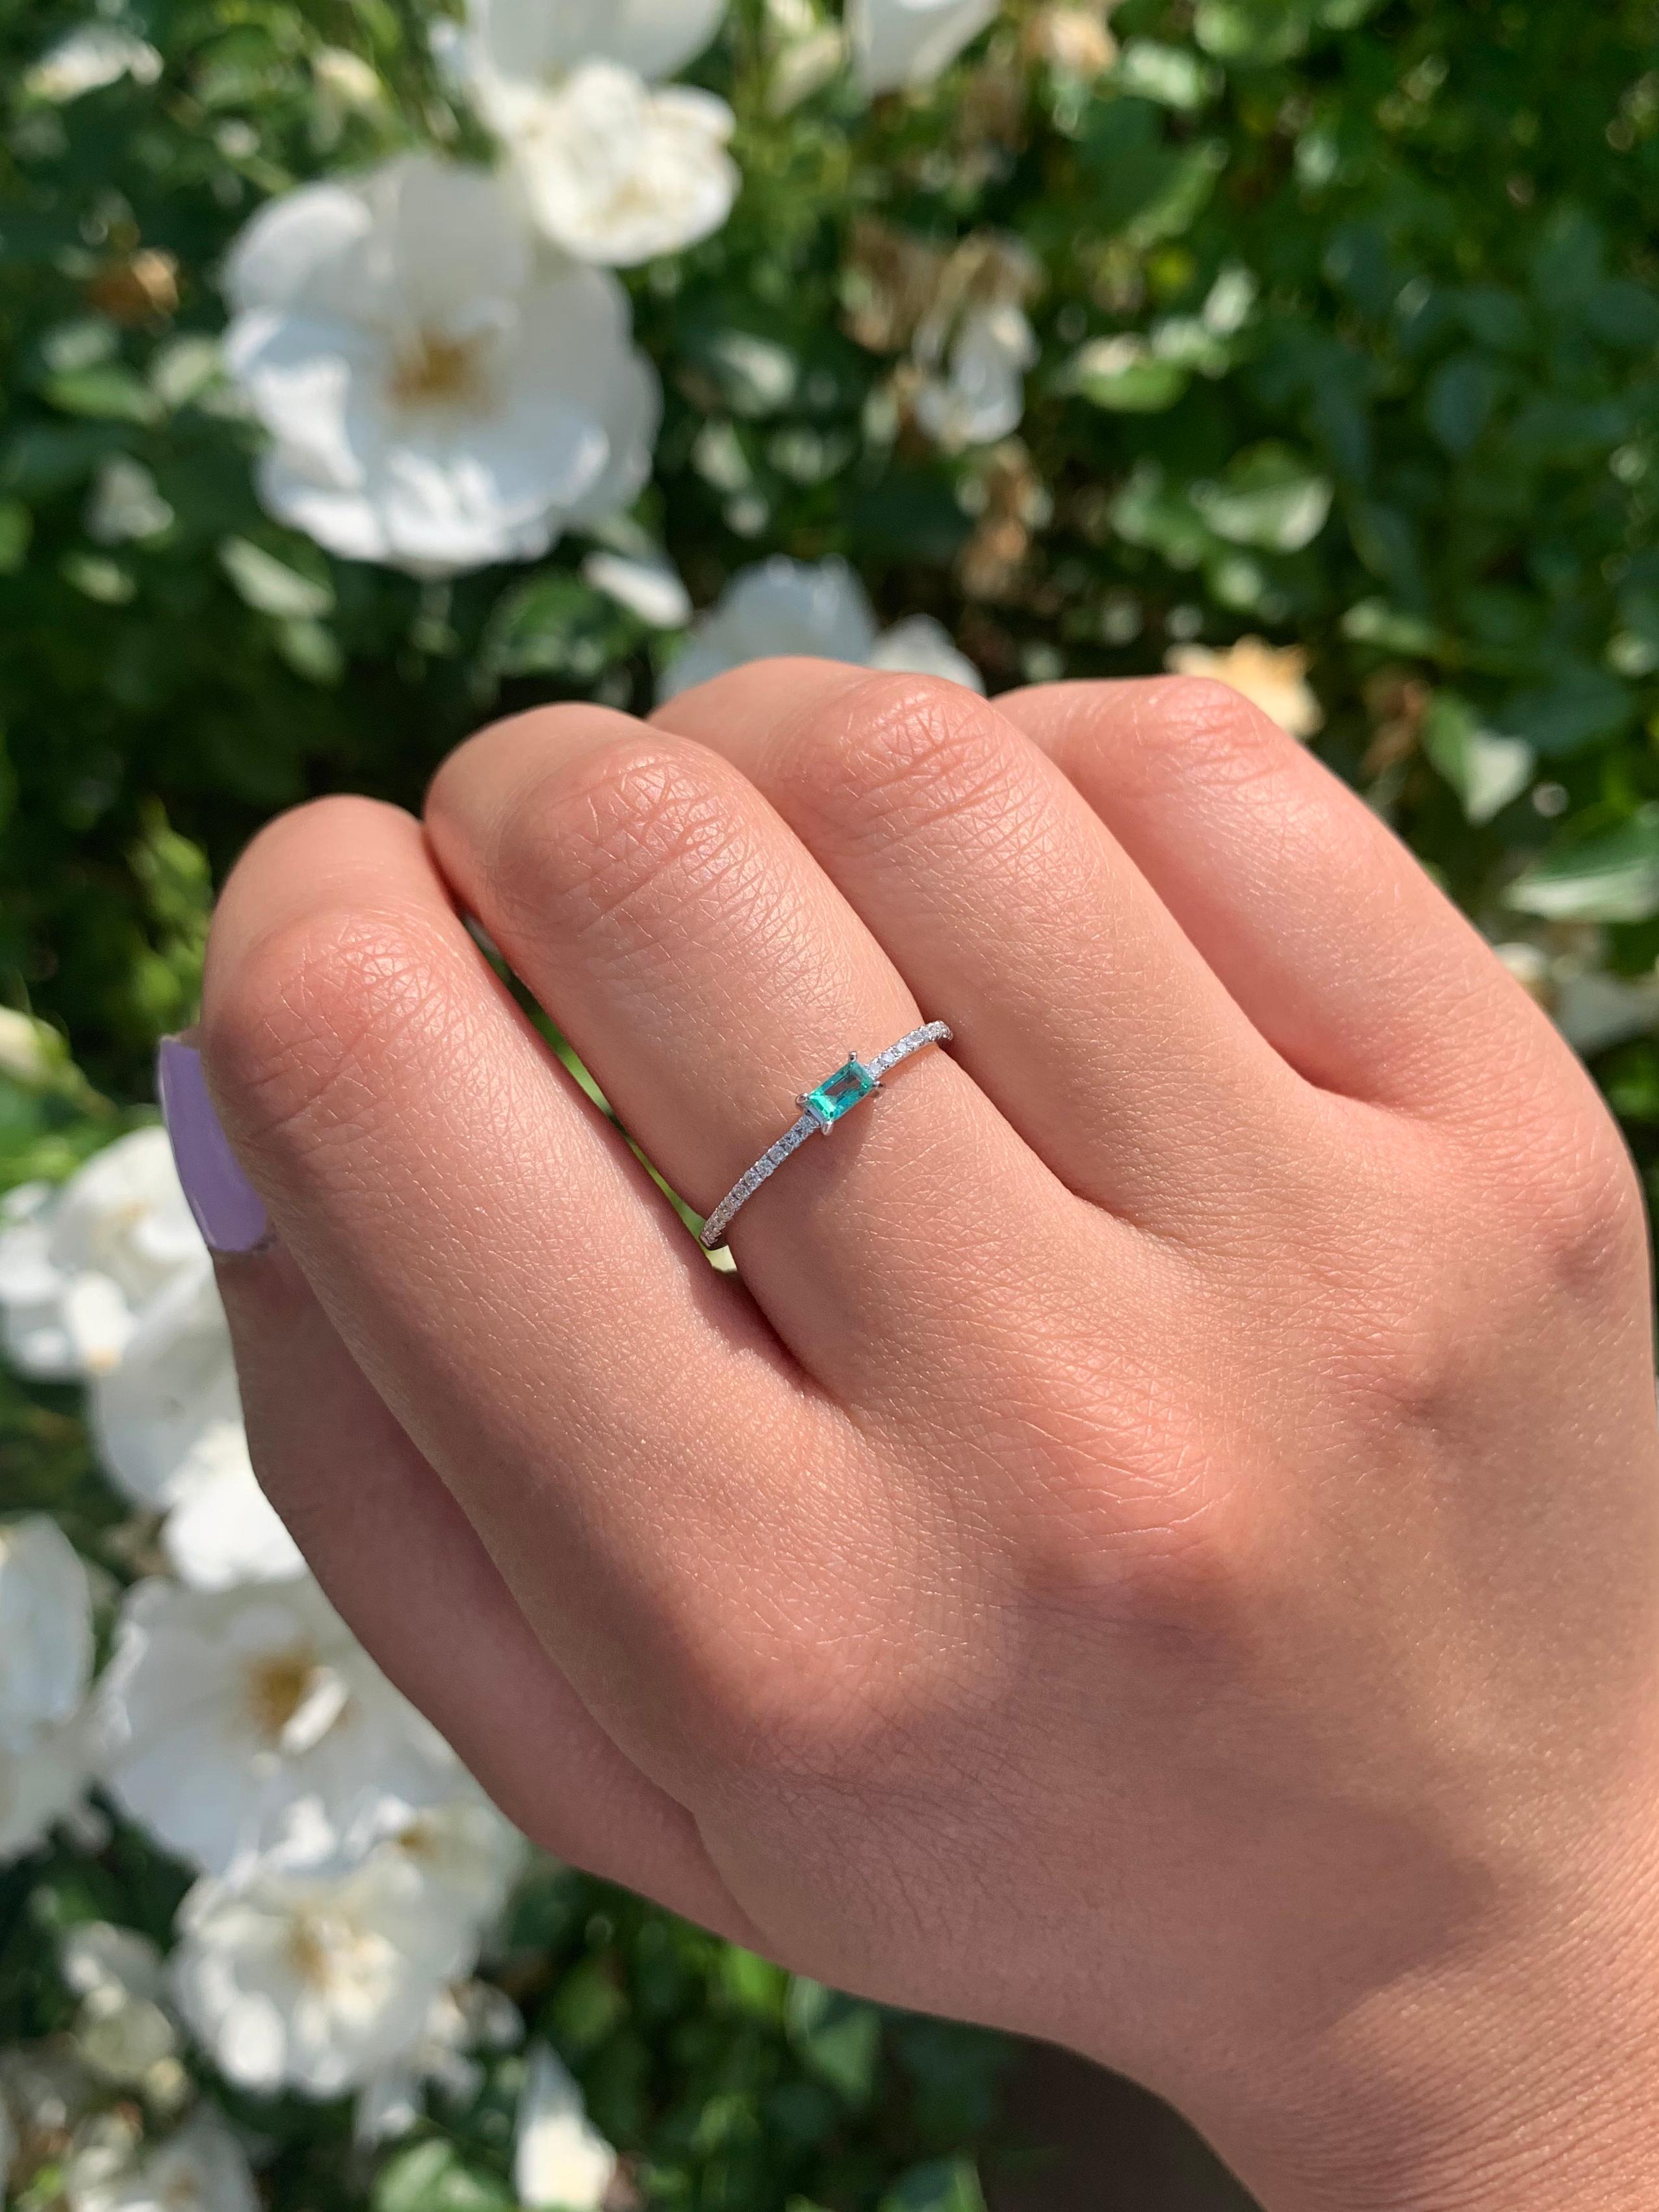 Charming and Elusive Design - This stackable ring features a 14k gold band, a baguette shaped gorgeous emerald approximately 0.10cts, and round diamonds approximately 0.09 cts, available in white or yellow gold
Measurements for ring size: The finger